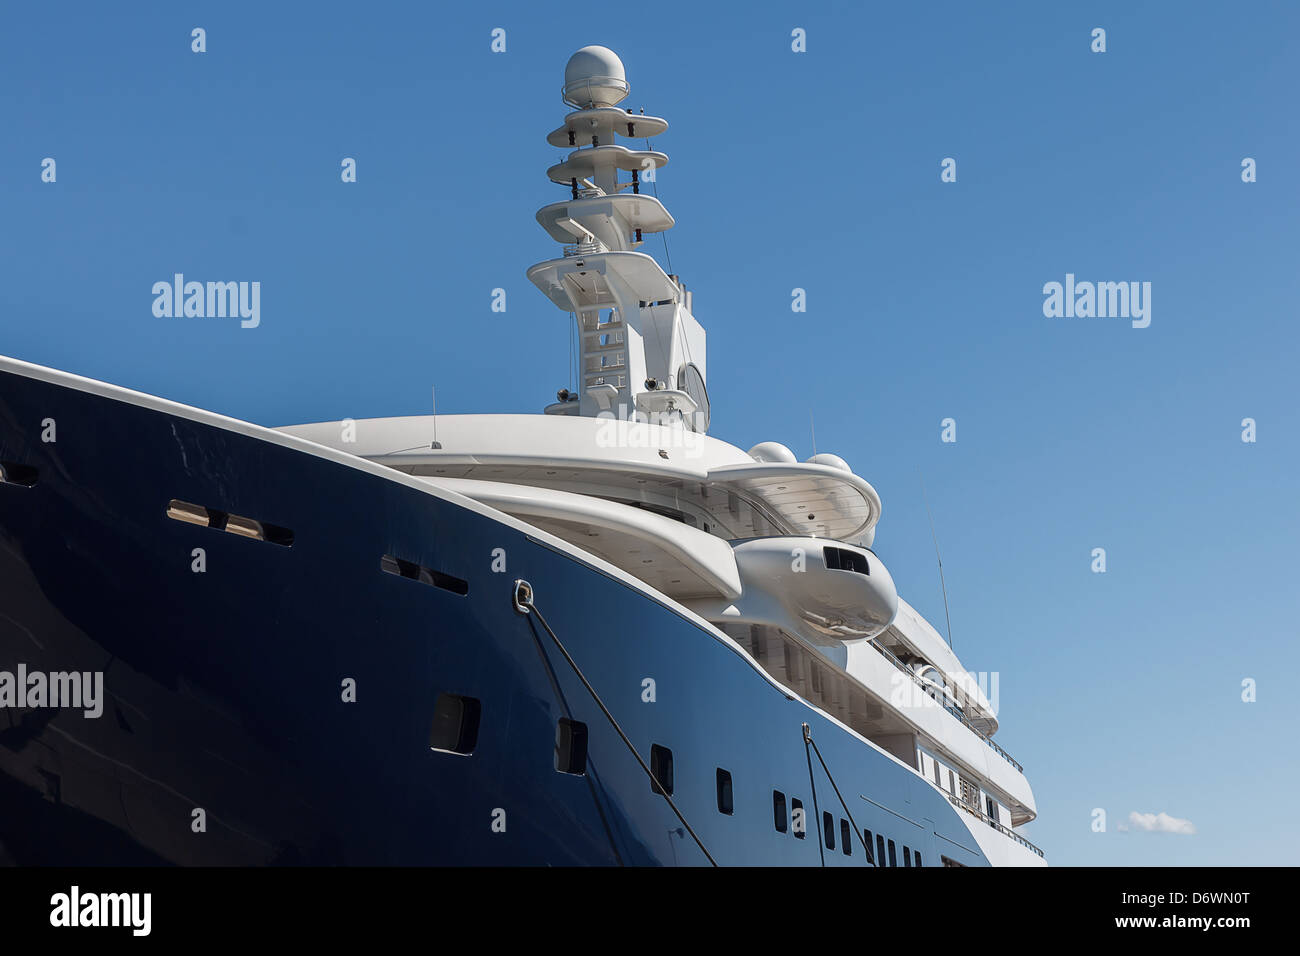 Part of large anchored ship or cruise against blue sky Stock Photo